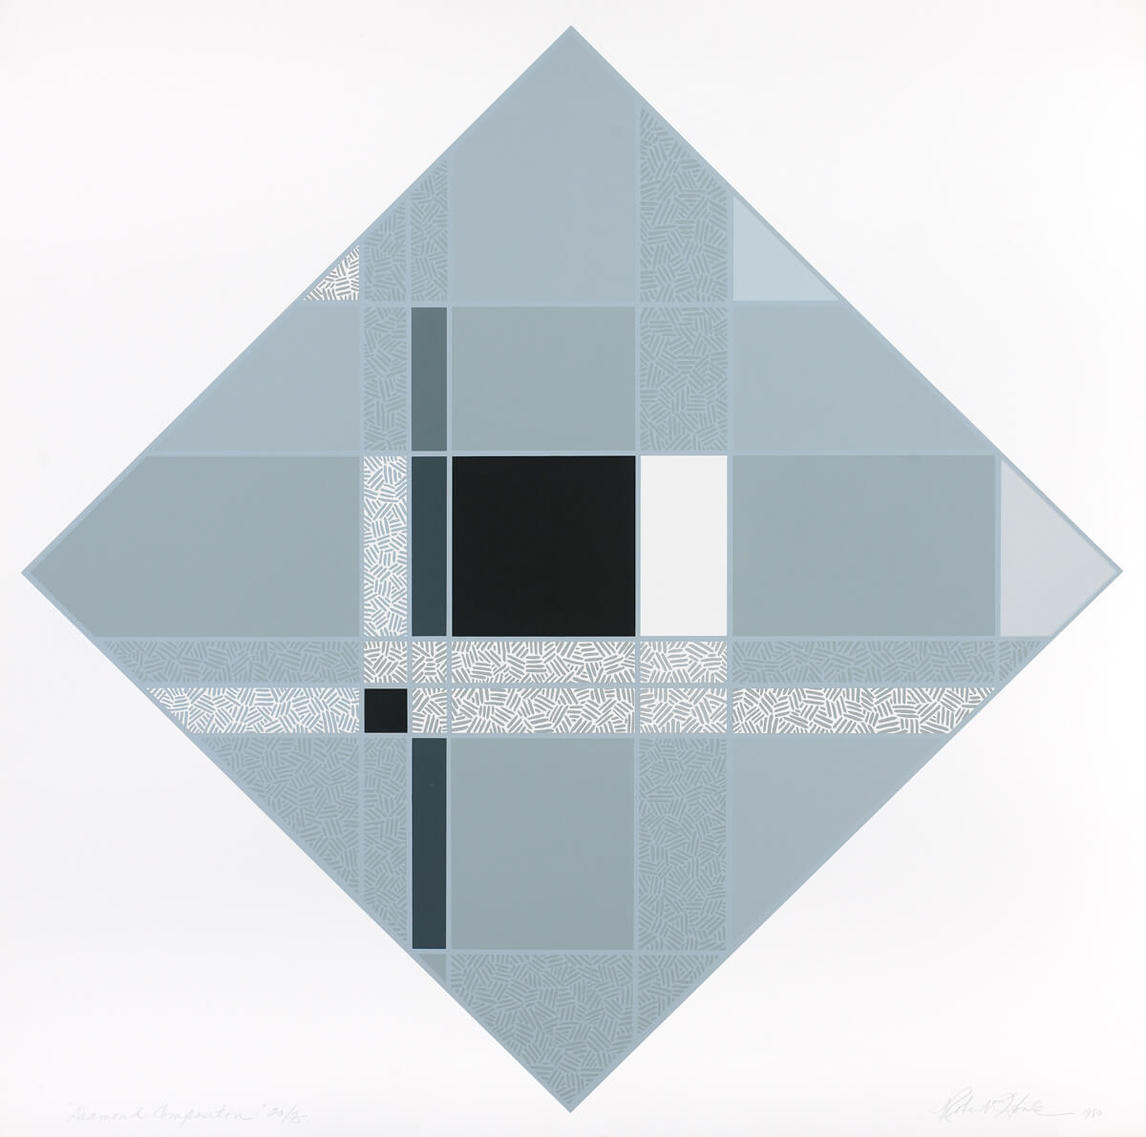 Diamond Composition, 1980, by Robert Houle